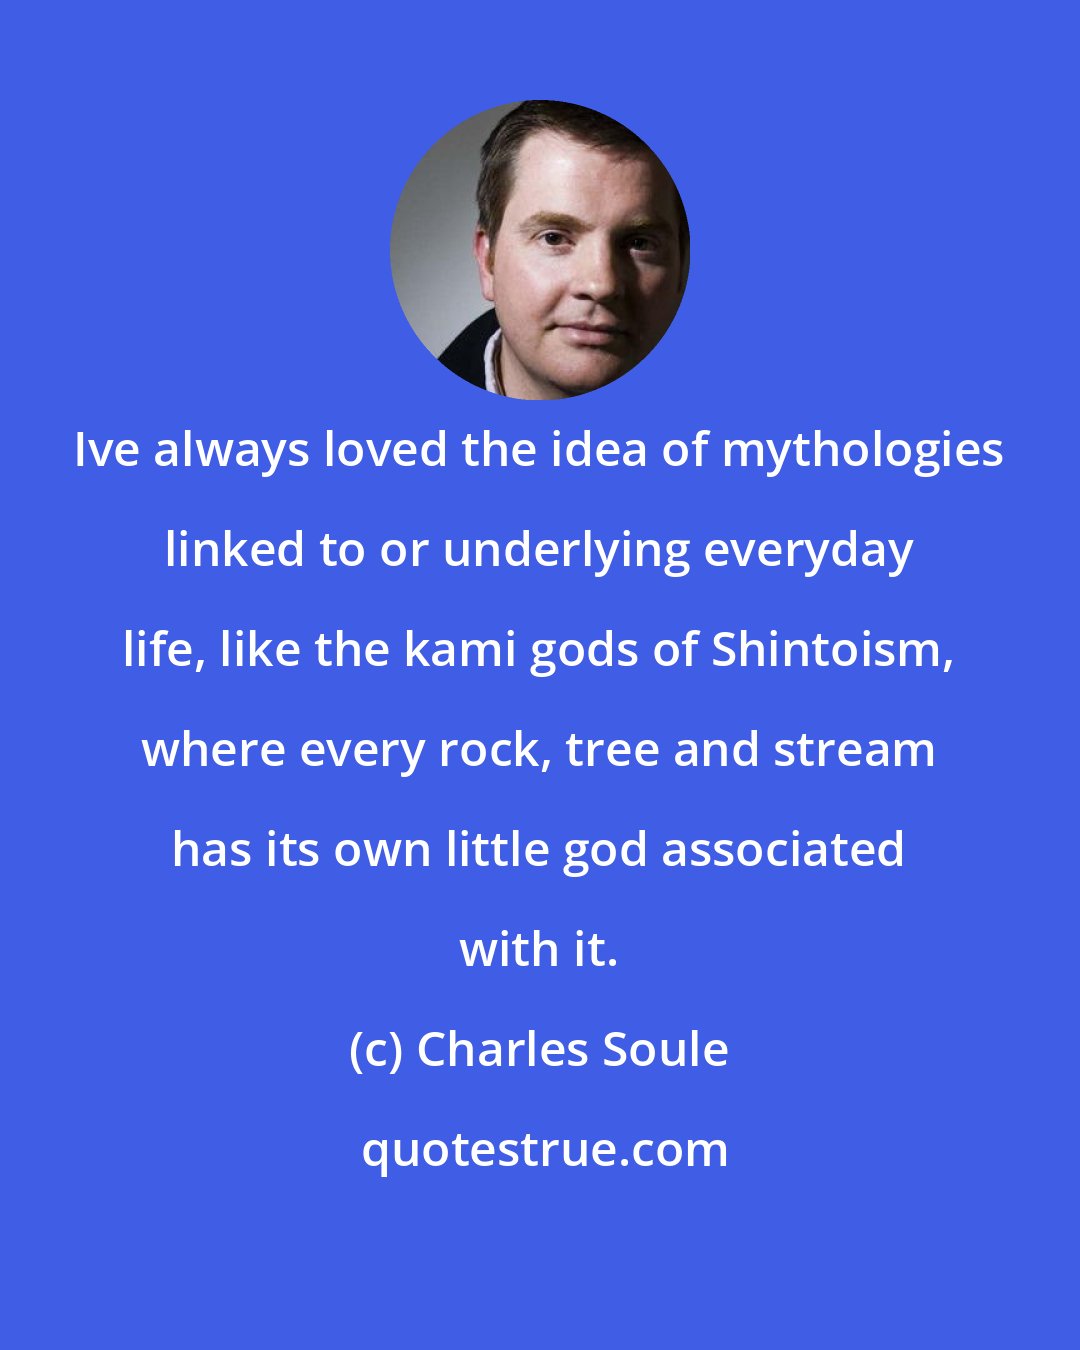 Charles Soule: Ive always loved the idea of mythologies linked to or underlying everyday life, like the kami gods of Shintoism, where every rock, tree and stream has its own little god associated with it.